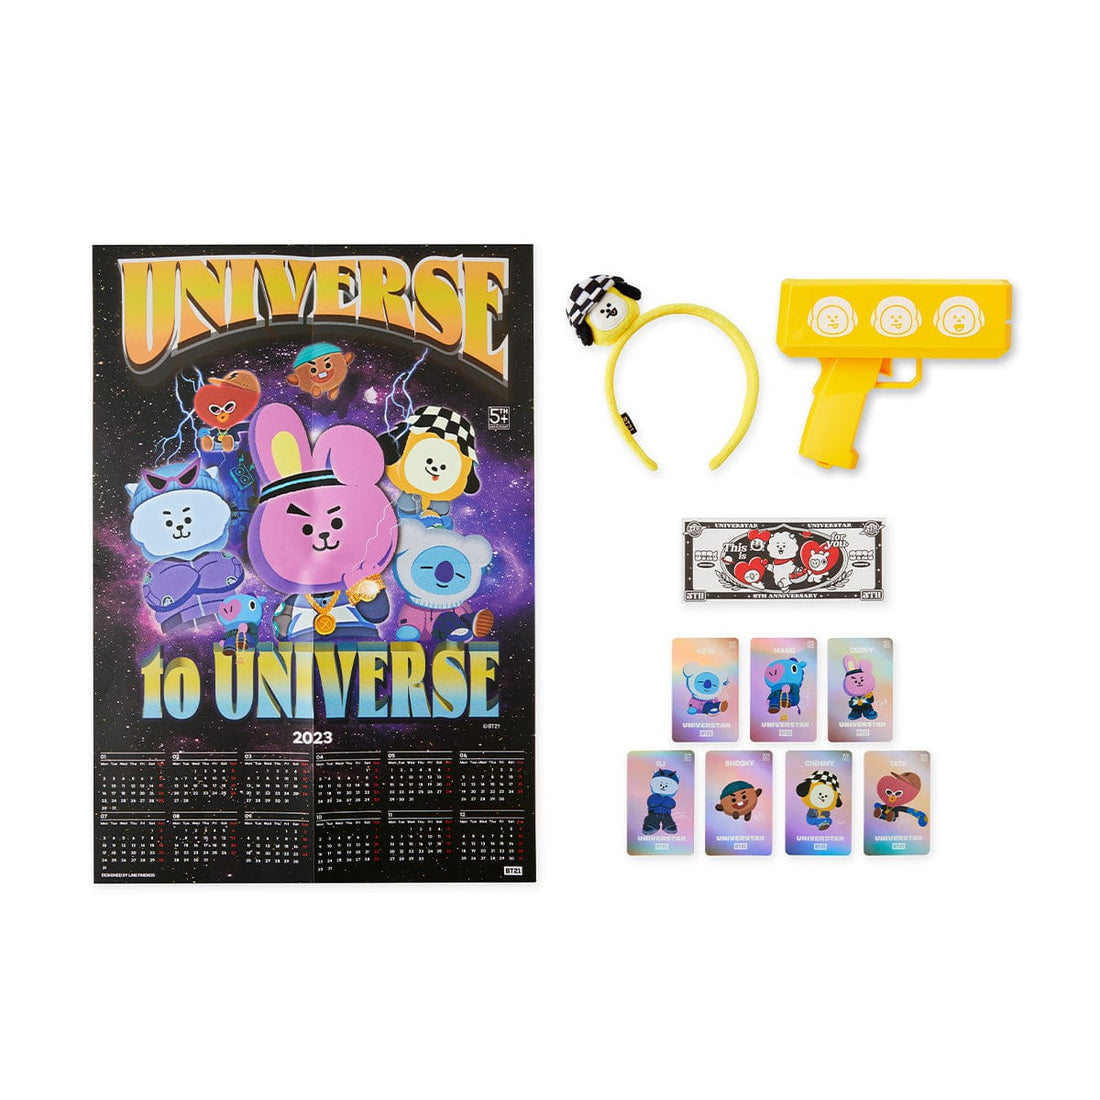 LINE FRIENDS TOYS CHIMMY BT21 CHIMMY 5 Years Anniversary SEASON?™S GREETINGS PACKAGE